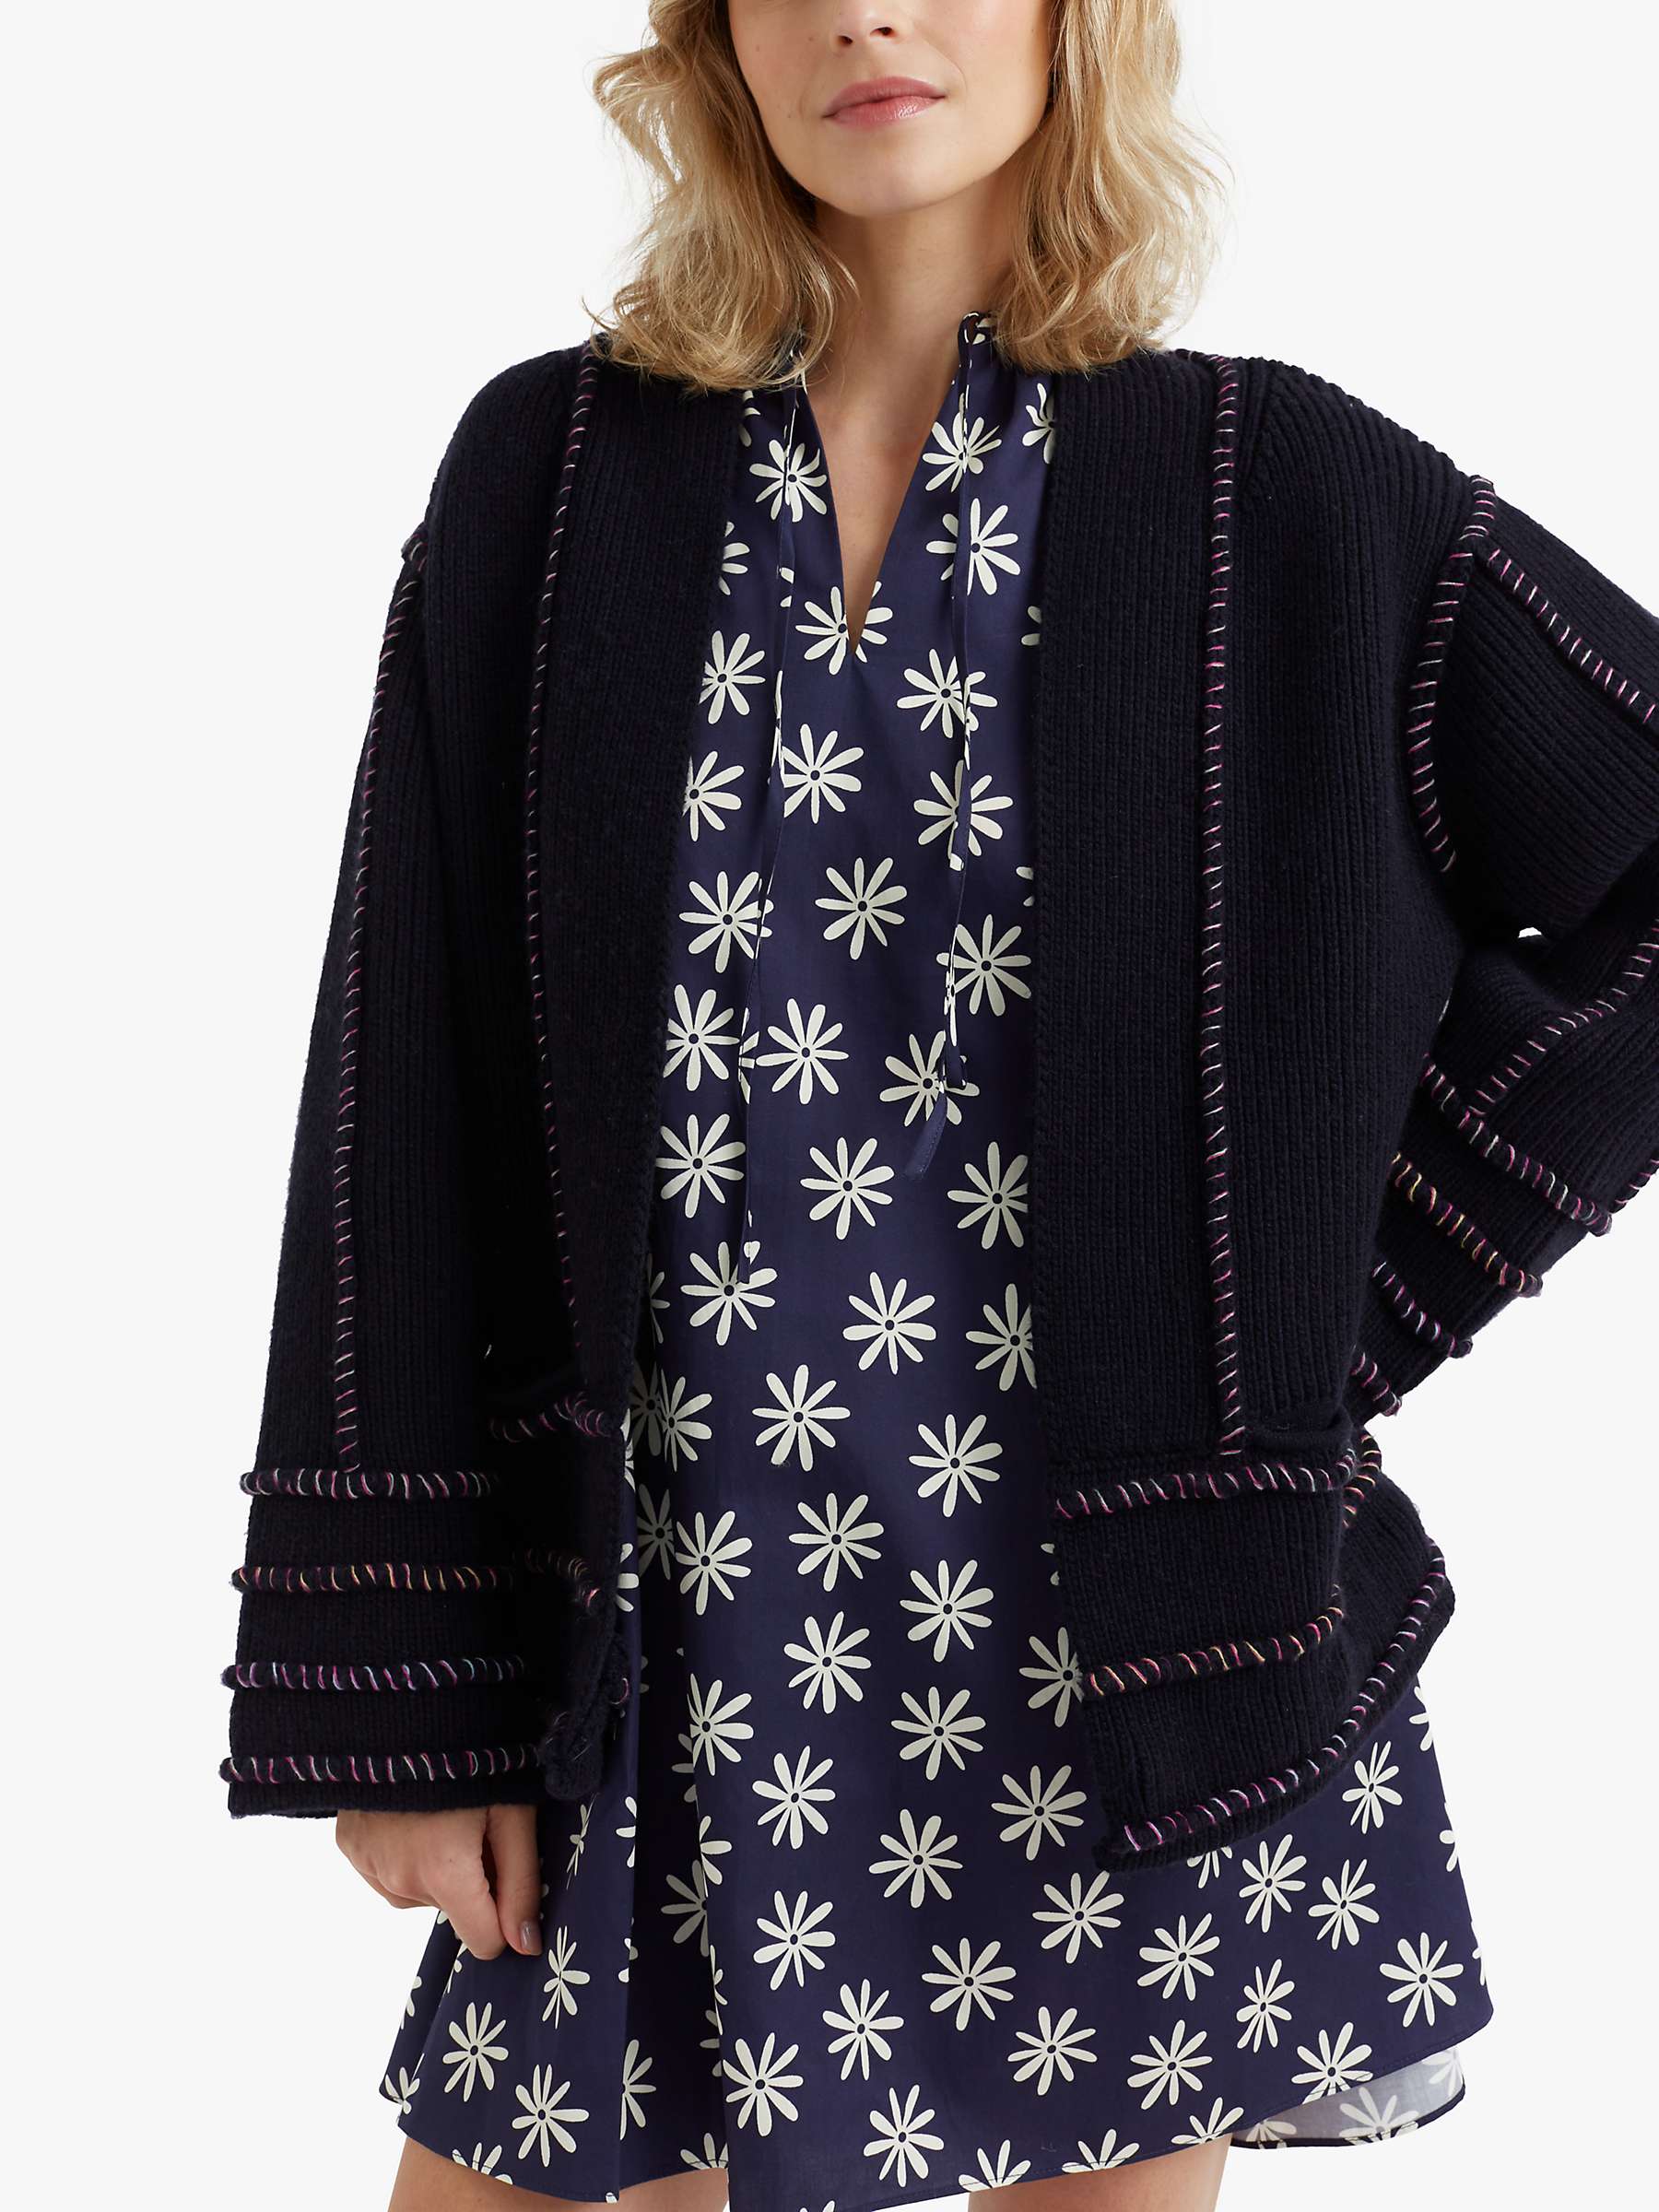 Buy Chinti & Parker Contrast Stitch Wool Cashmere Blend Jacket, Deep Navy/Multi Online at johnlewis.com